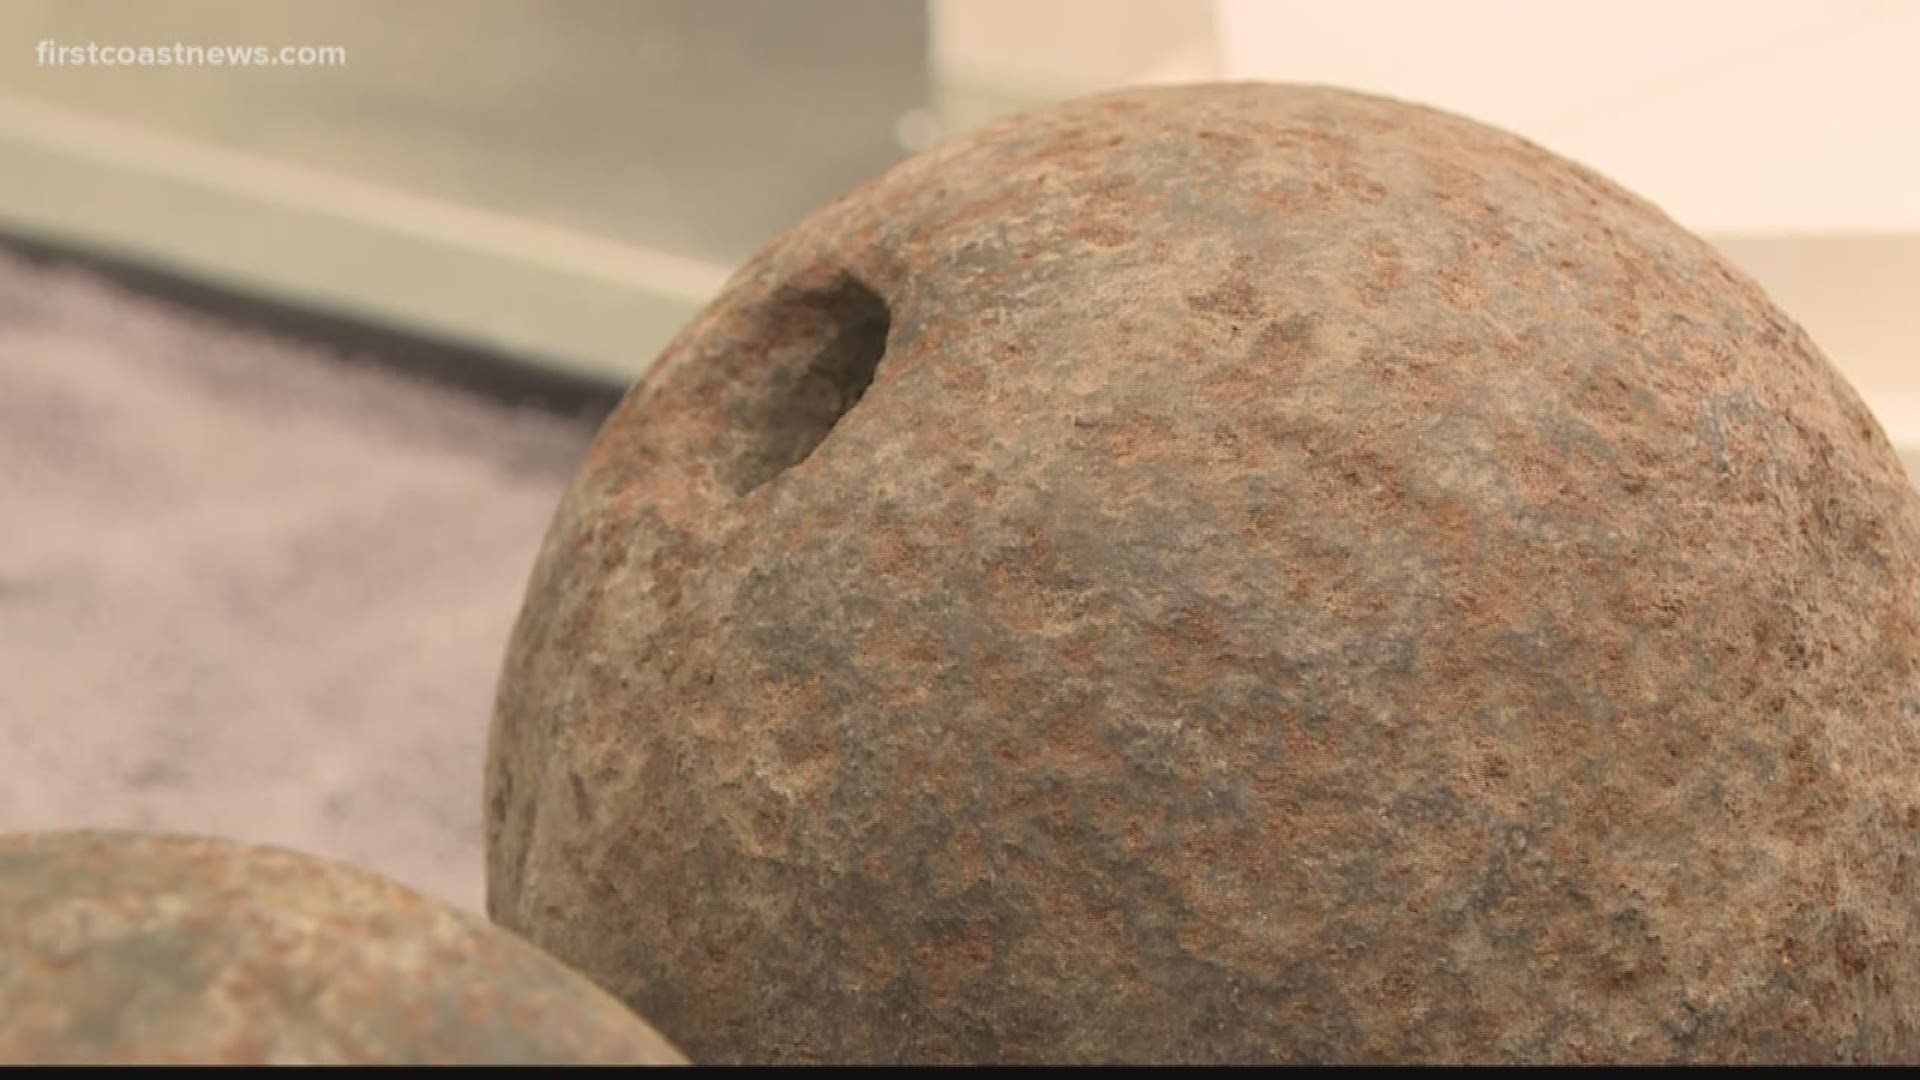 Experts are looking to determine the history behind a pile of cannonballs at the fort in St. Augustine. The cannonballs may date to the Civil War.